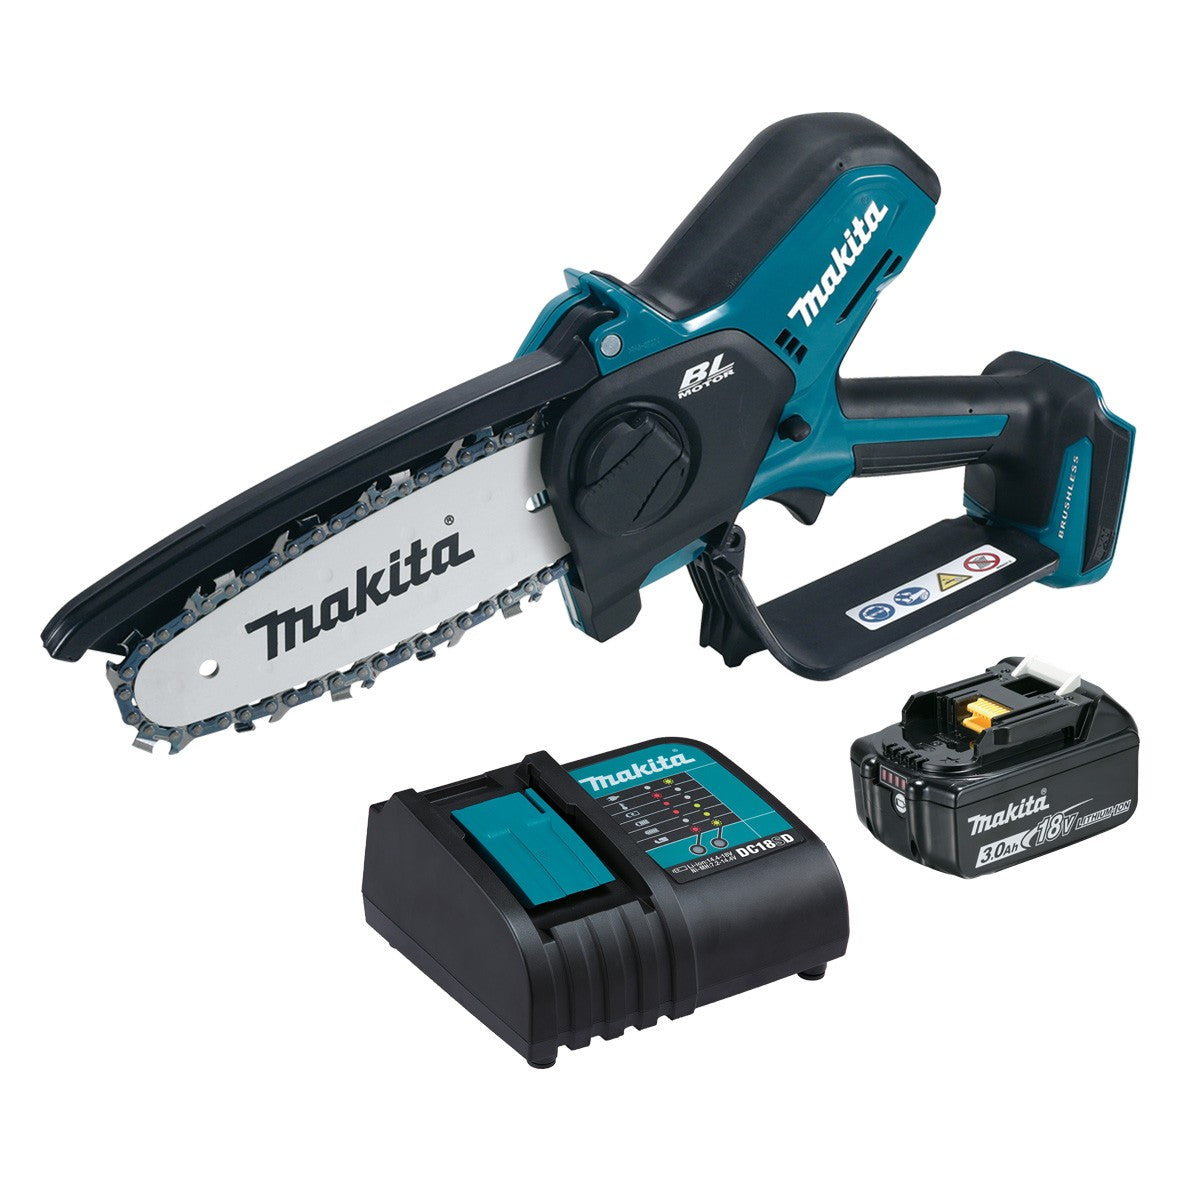 18V 150mm Brushless Pruning Saw Kit DUC150SF by Makita